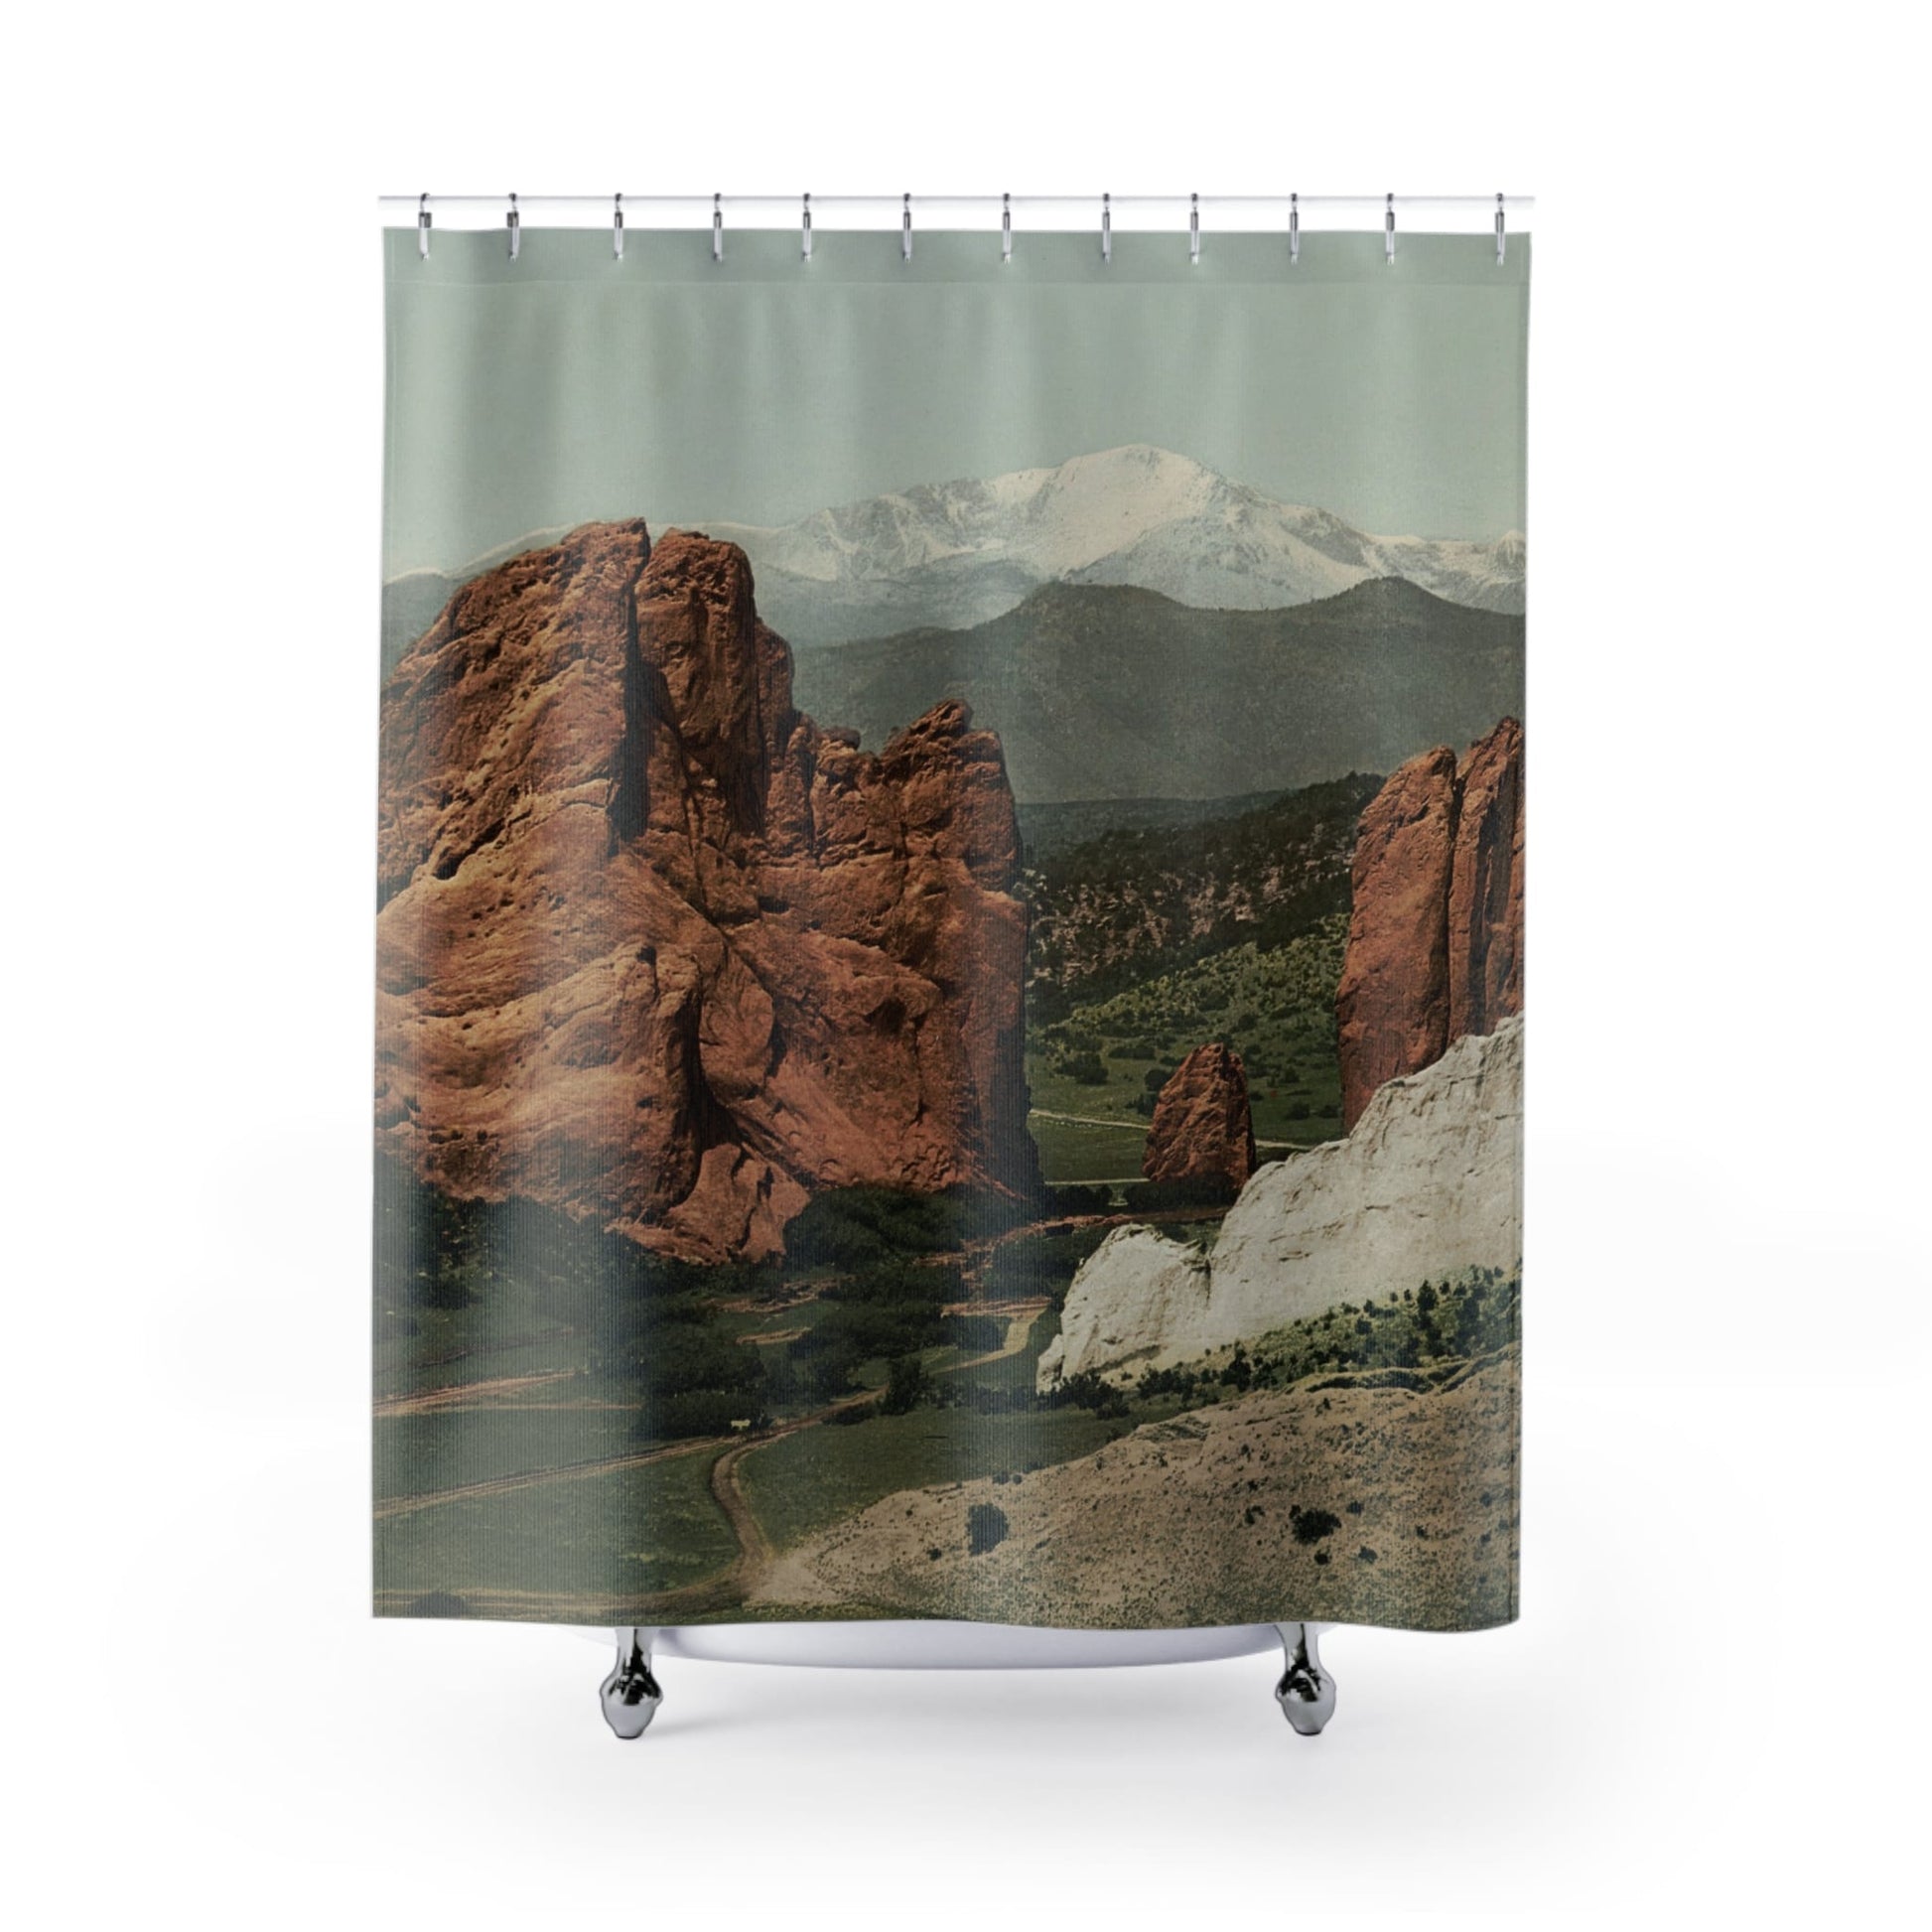 The Gateway Shower Curtain with Garden of the Gods design, naturalistic bathroom decor featuring impressive rock formations.